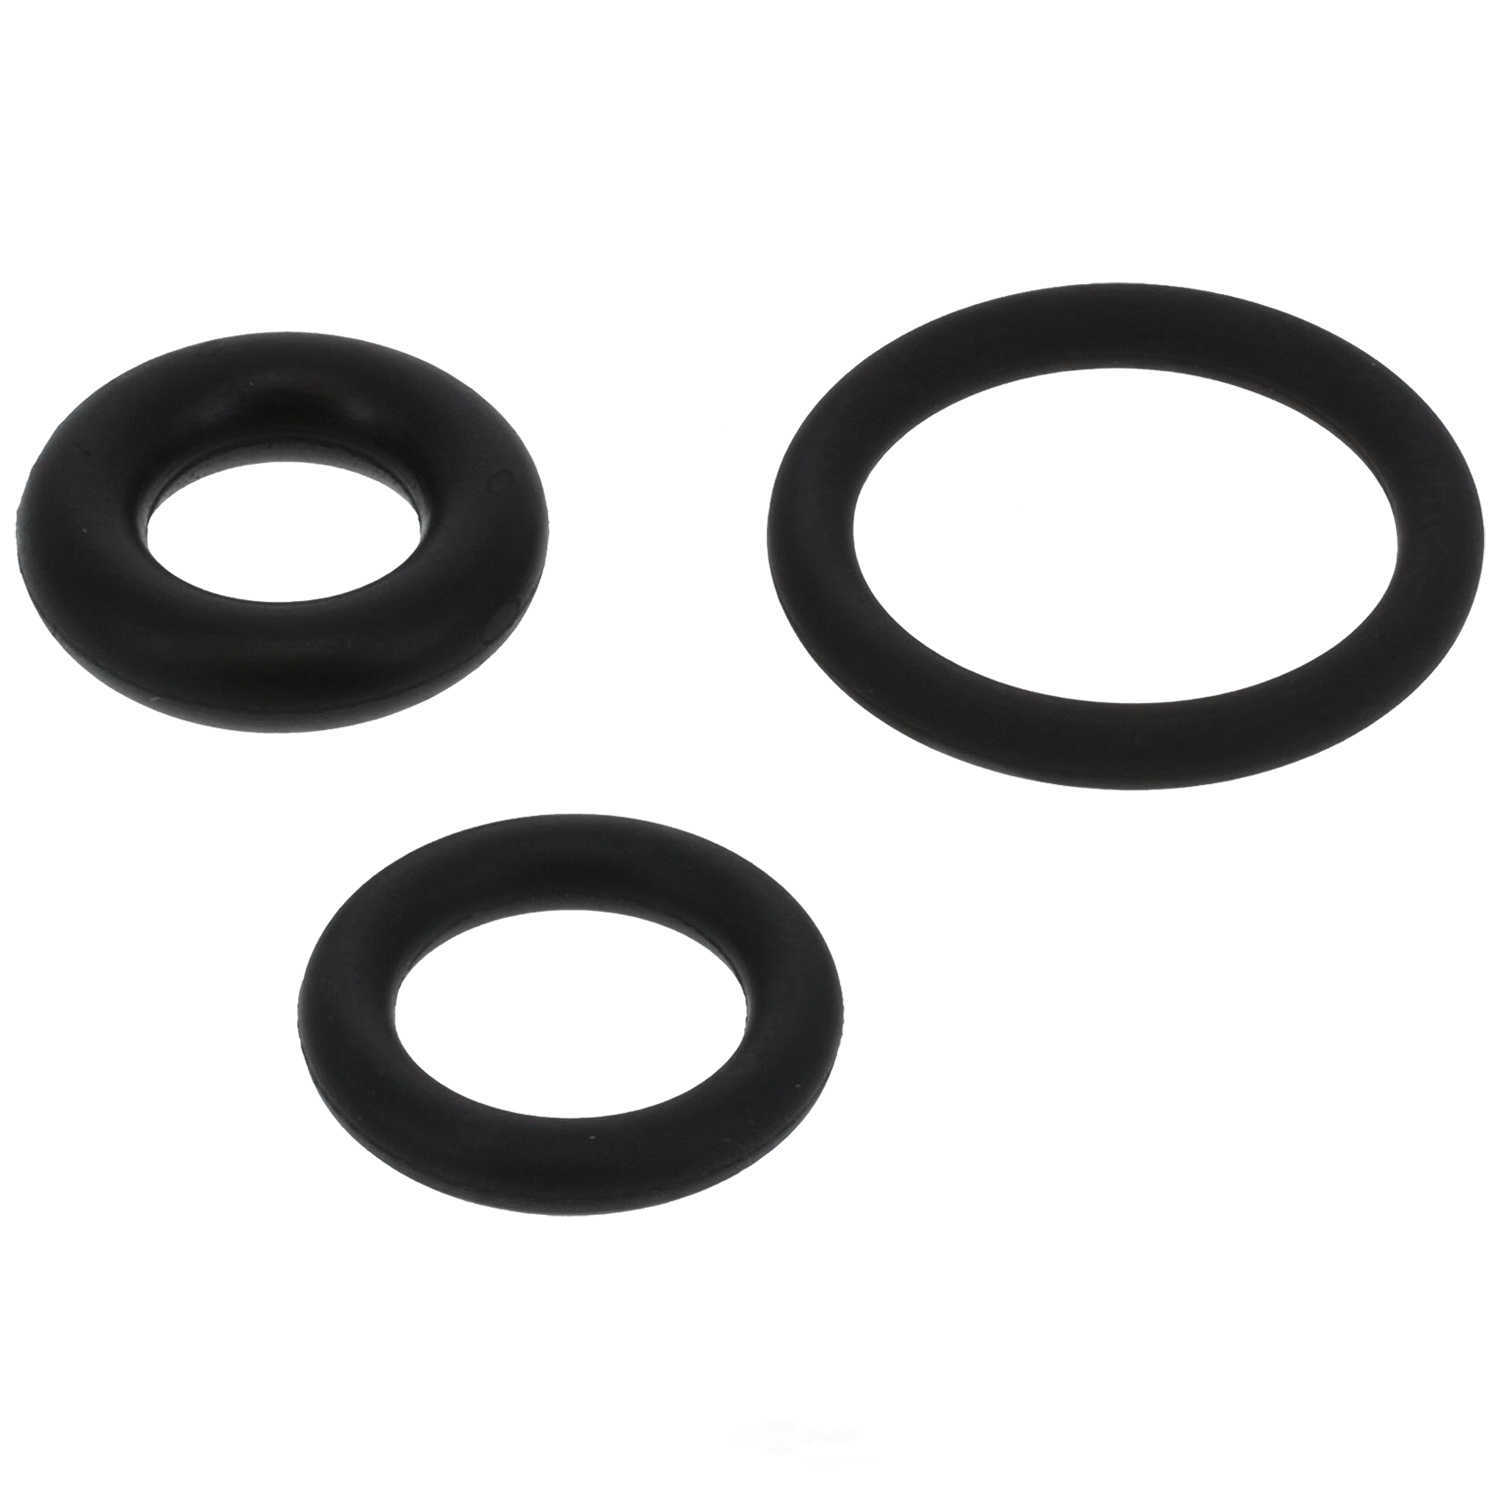 GB REMANUFACTURING INC. - Fuel Injector Seal Kit - GBR 8-042